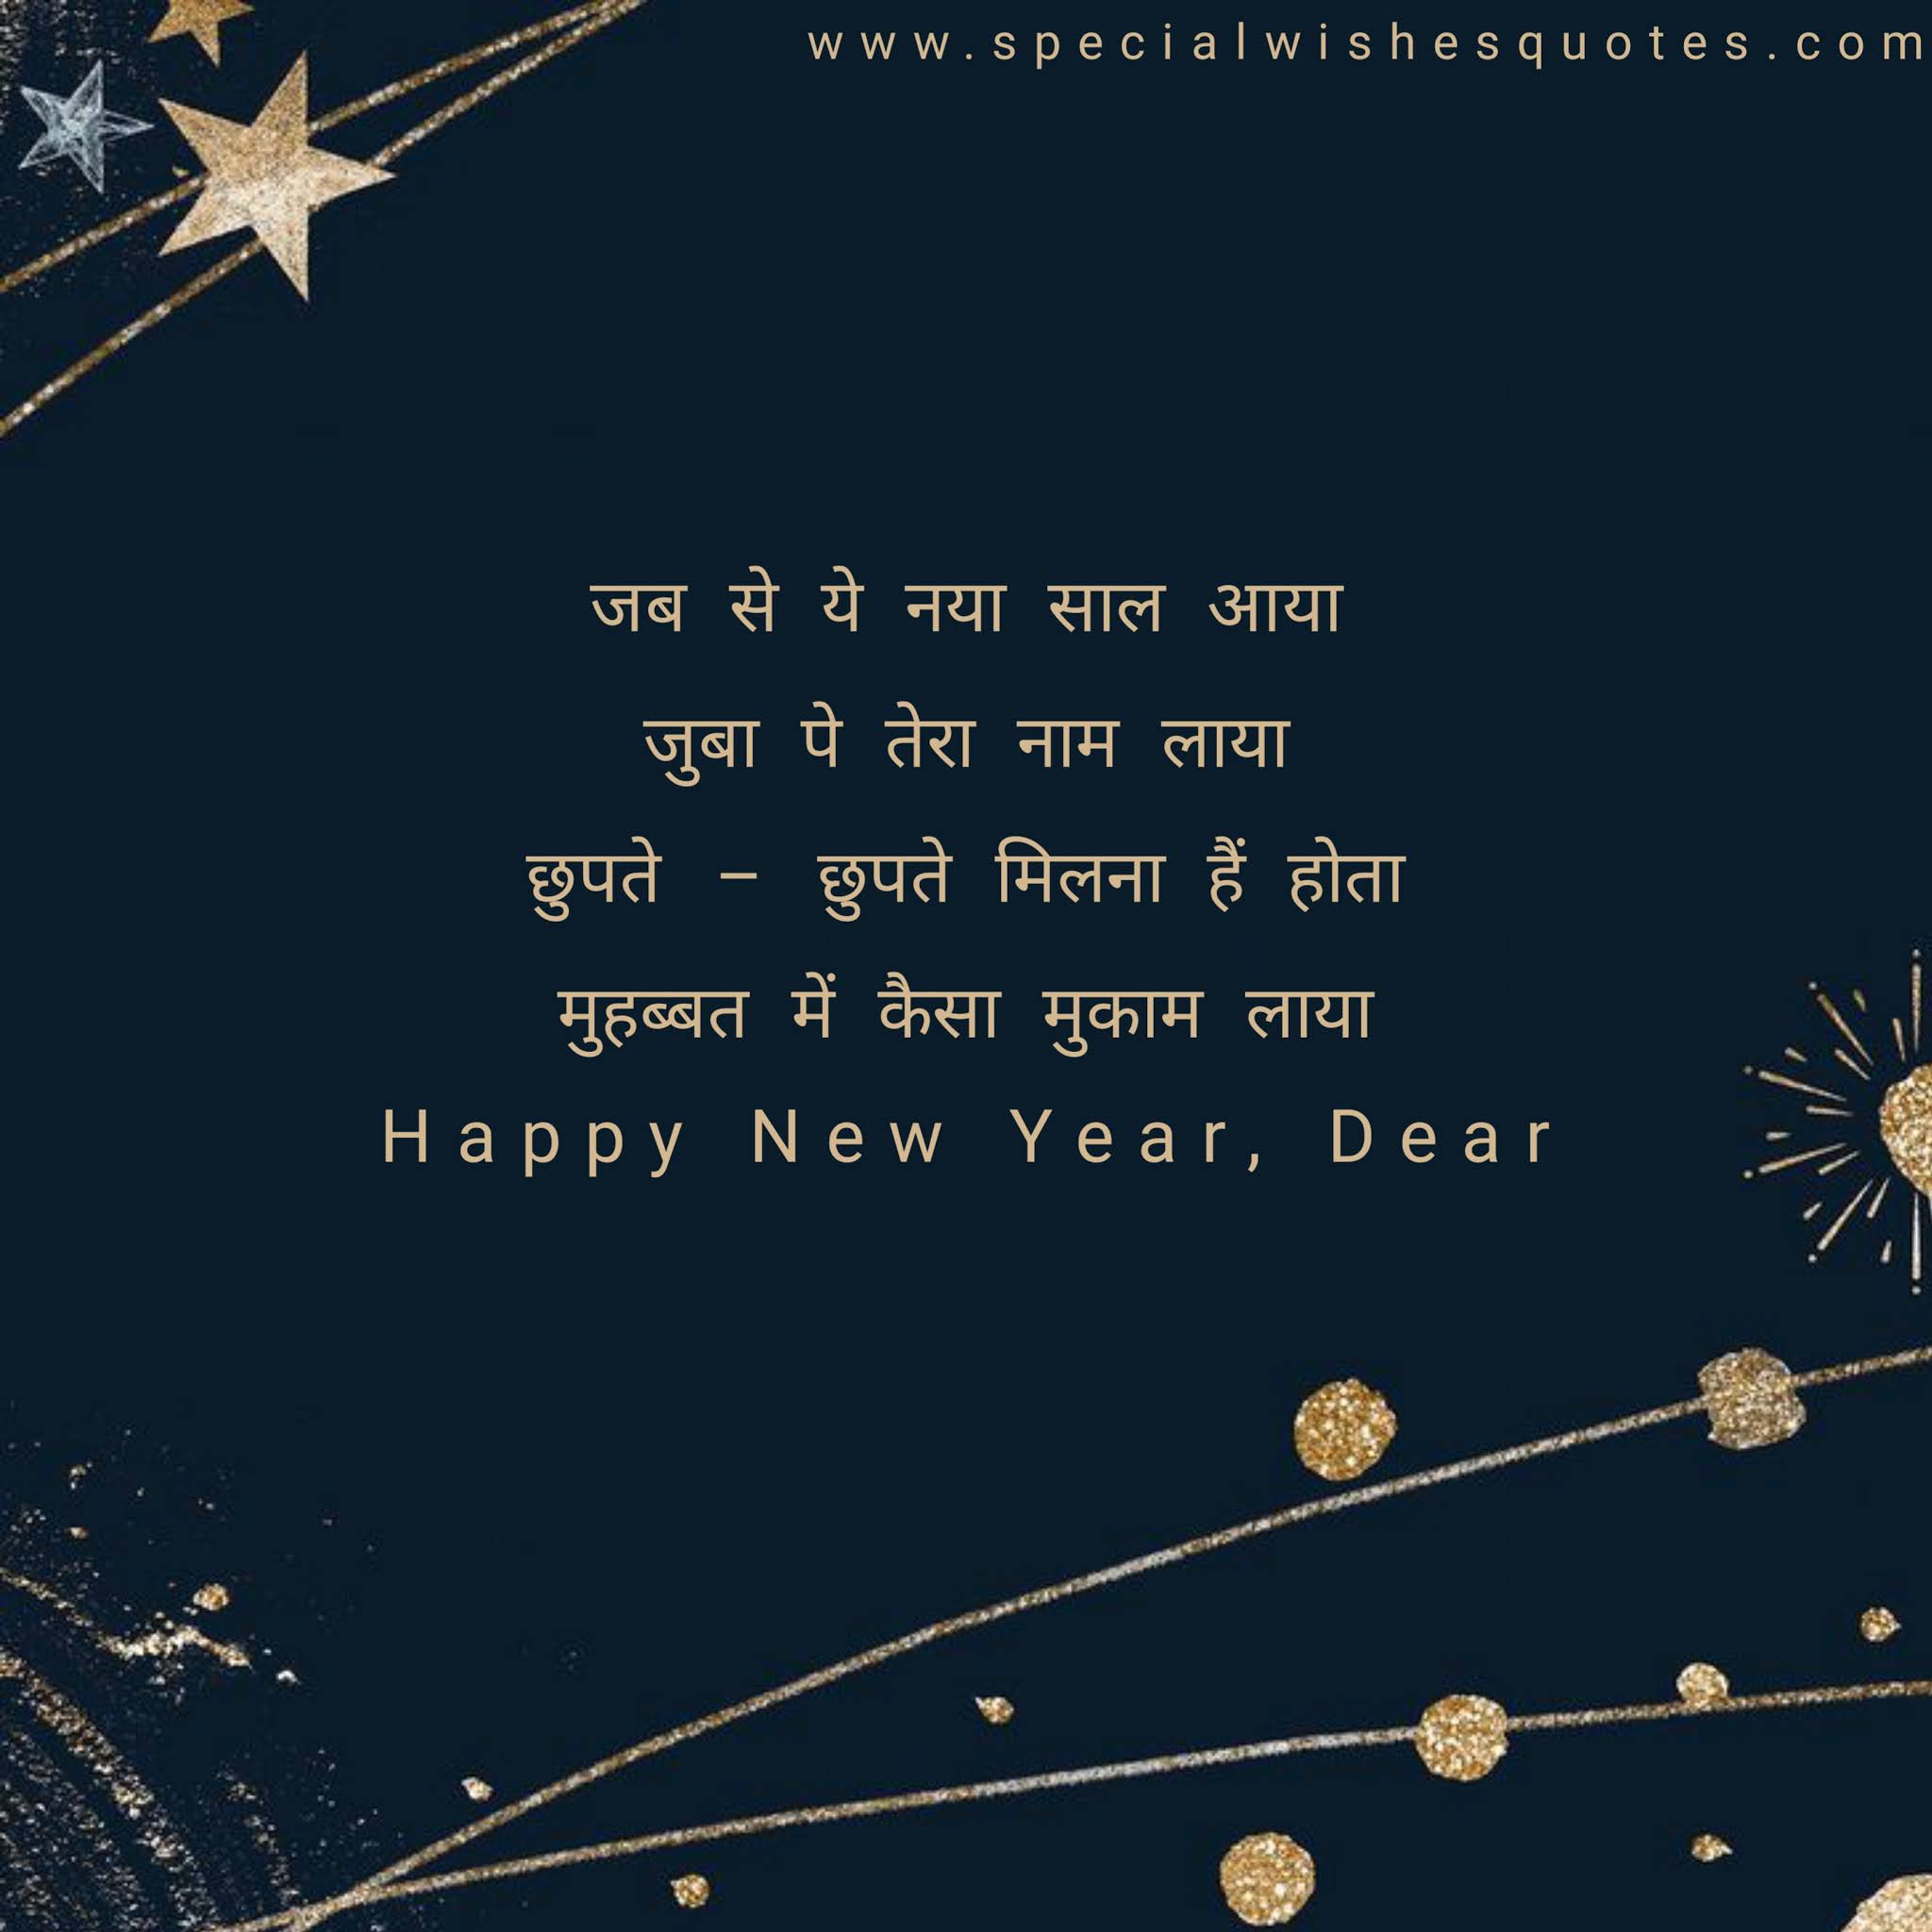 new year quotes for family